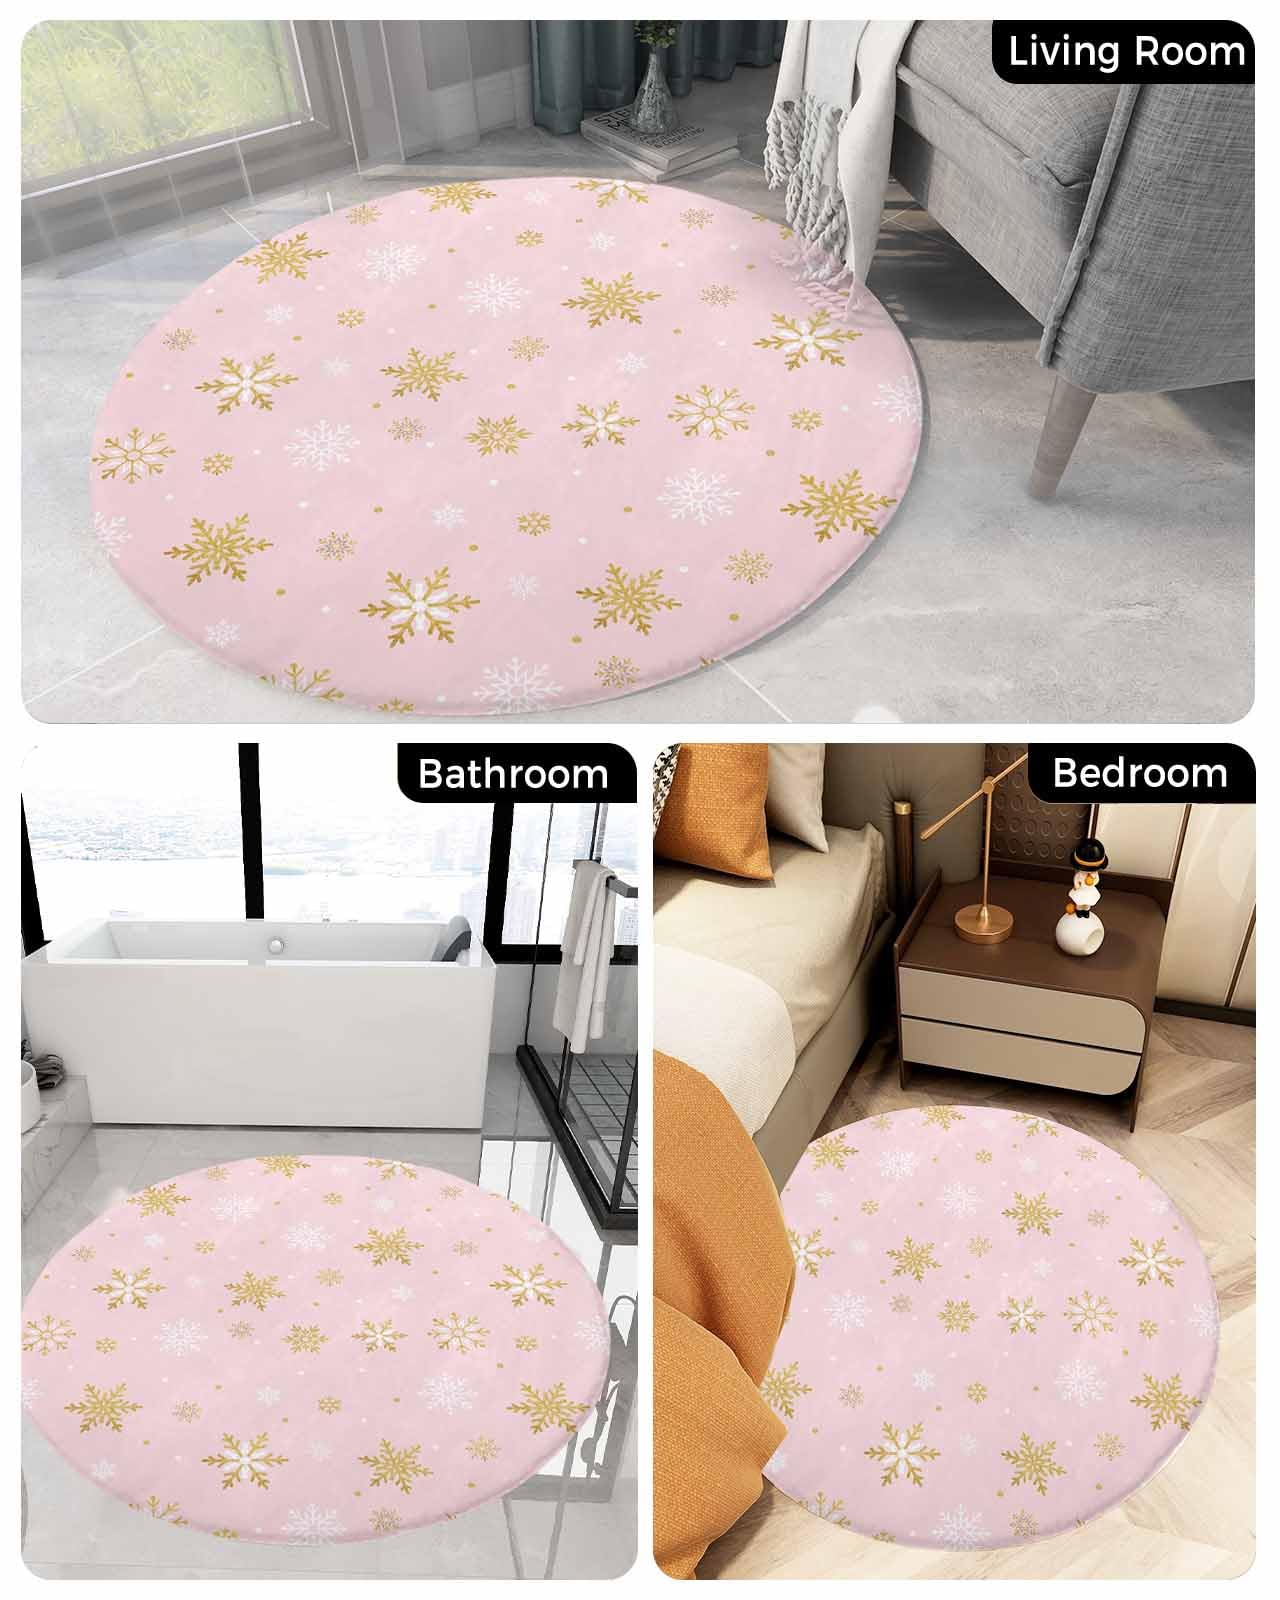 Blush Pink Snowflake Fluffy Round Area Rug Carpets 3.3ft, Plush Shaggy Carpet Soft Circular Rugs, Non-Slip Fuzzy Accent Floor Mat for Living Room Bedroom Nursery Merry Christmas Romantic Gold White